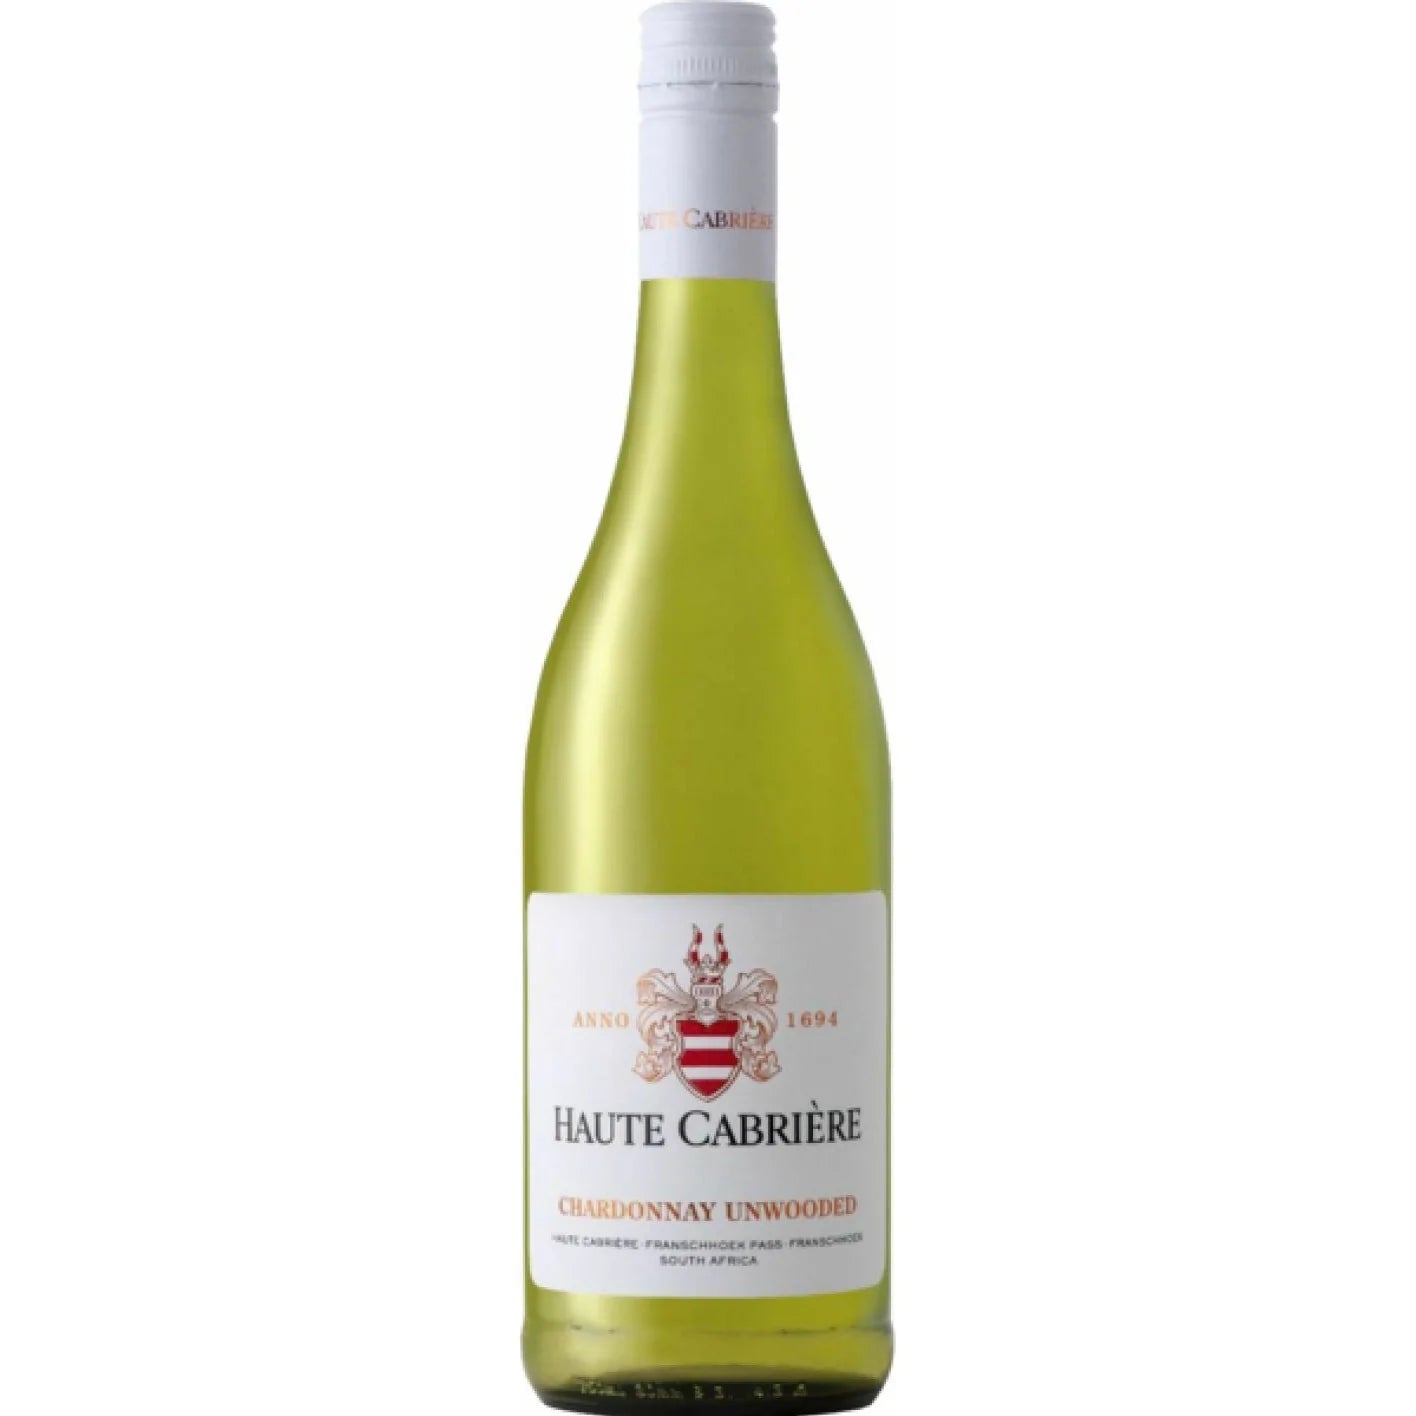 Haute Cabriere - Chardonnay Unwooded 750ml - Wildsprout